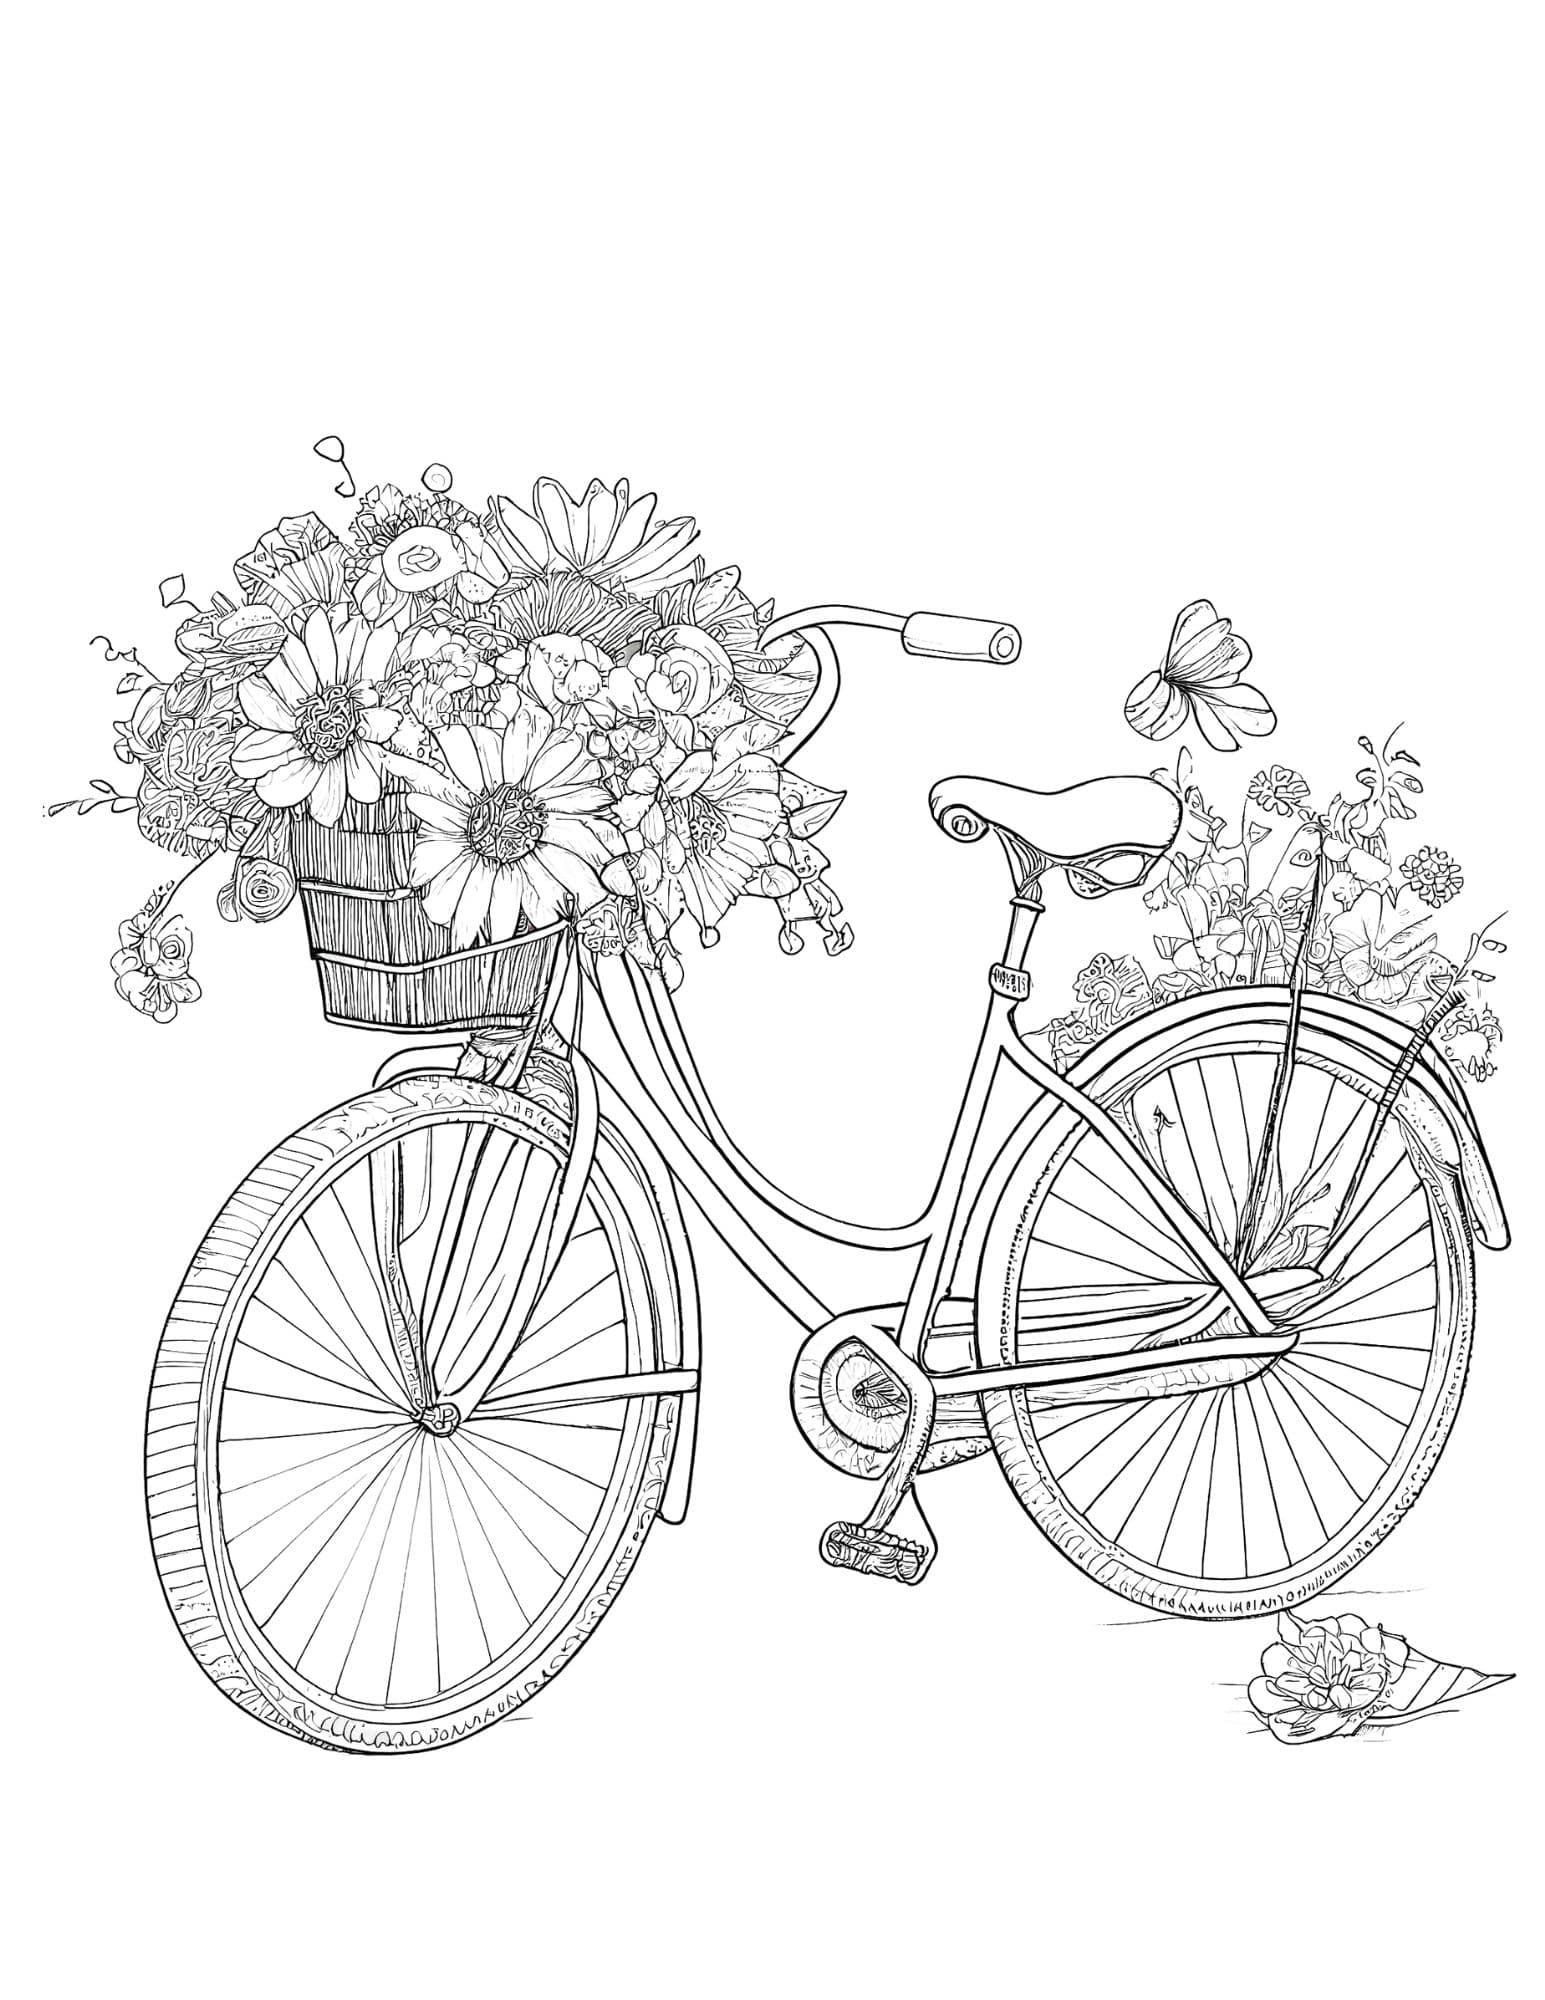 160+ Coloring Page Flowers: Blossom Your Imagination 43